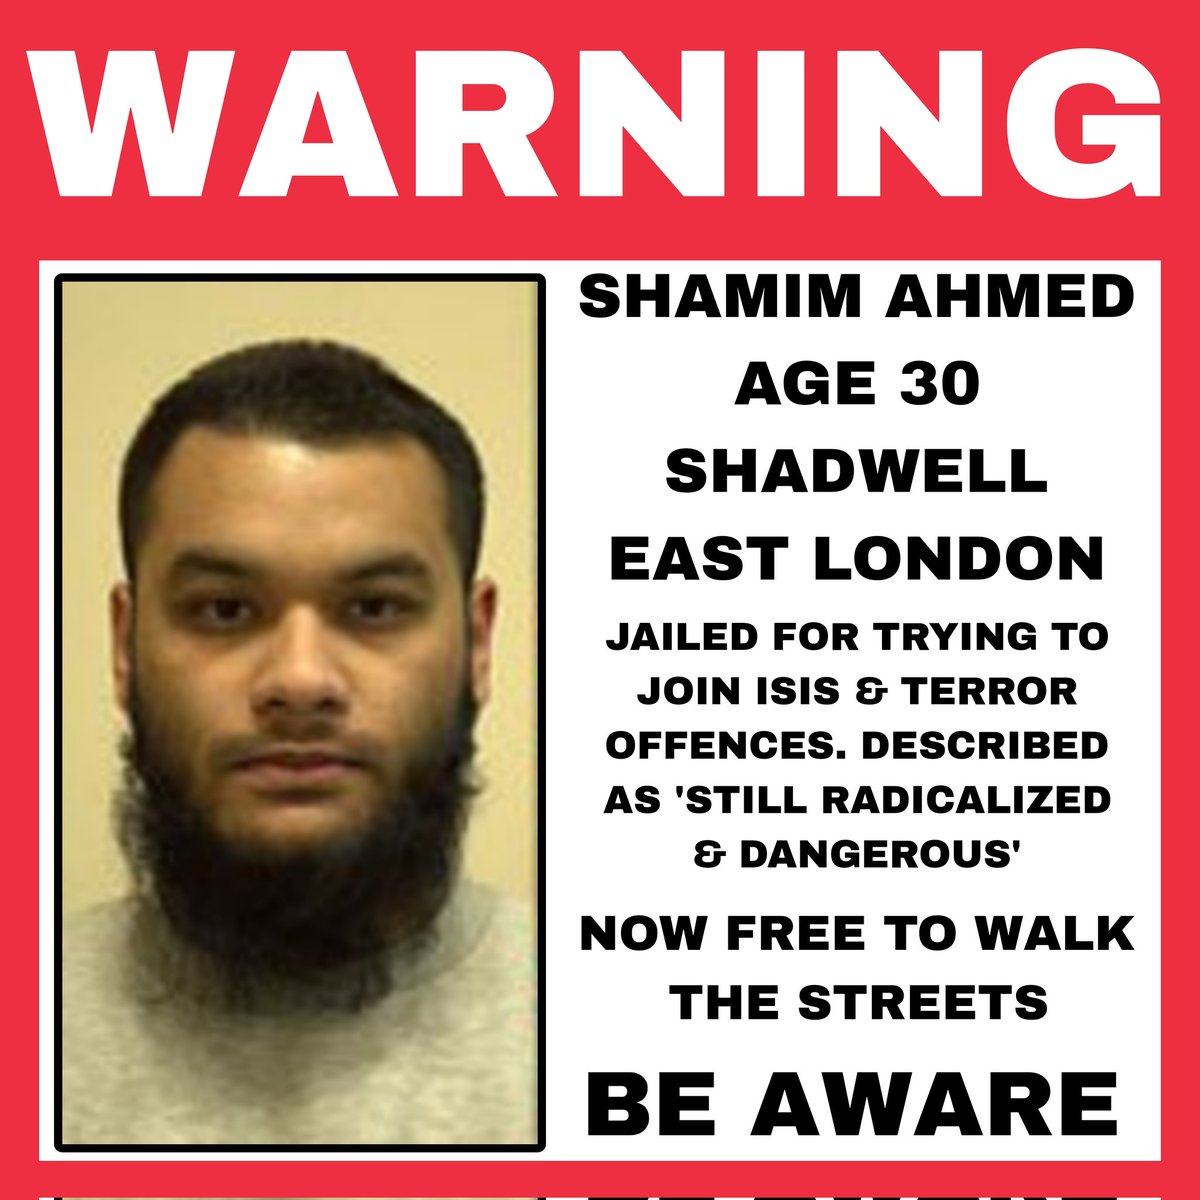 A muslim man who was jailed for trying to join ISIS is now free to walk British streets after a 6 year sentence despite warnings that he is still radicalized & dangerous.